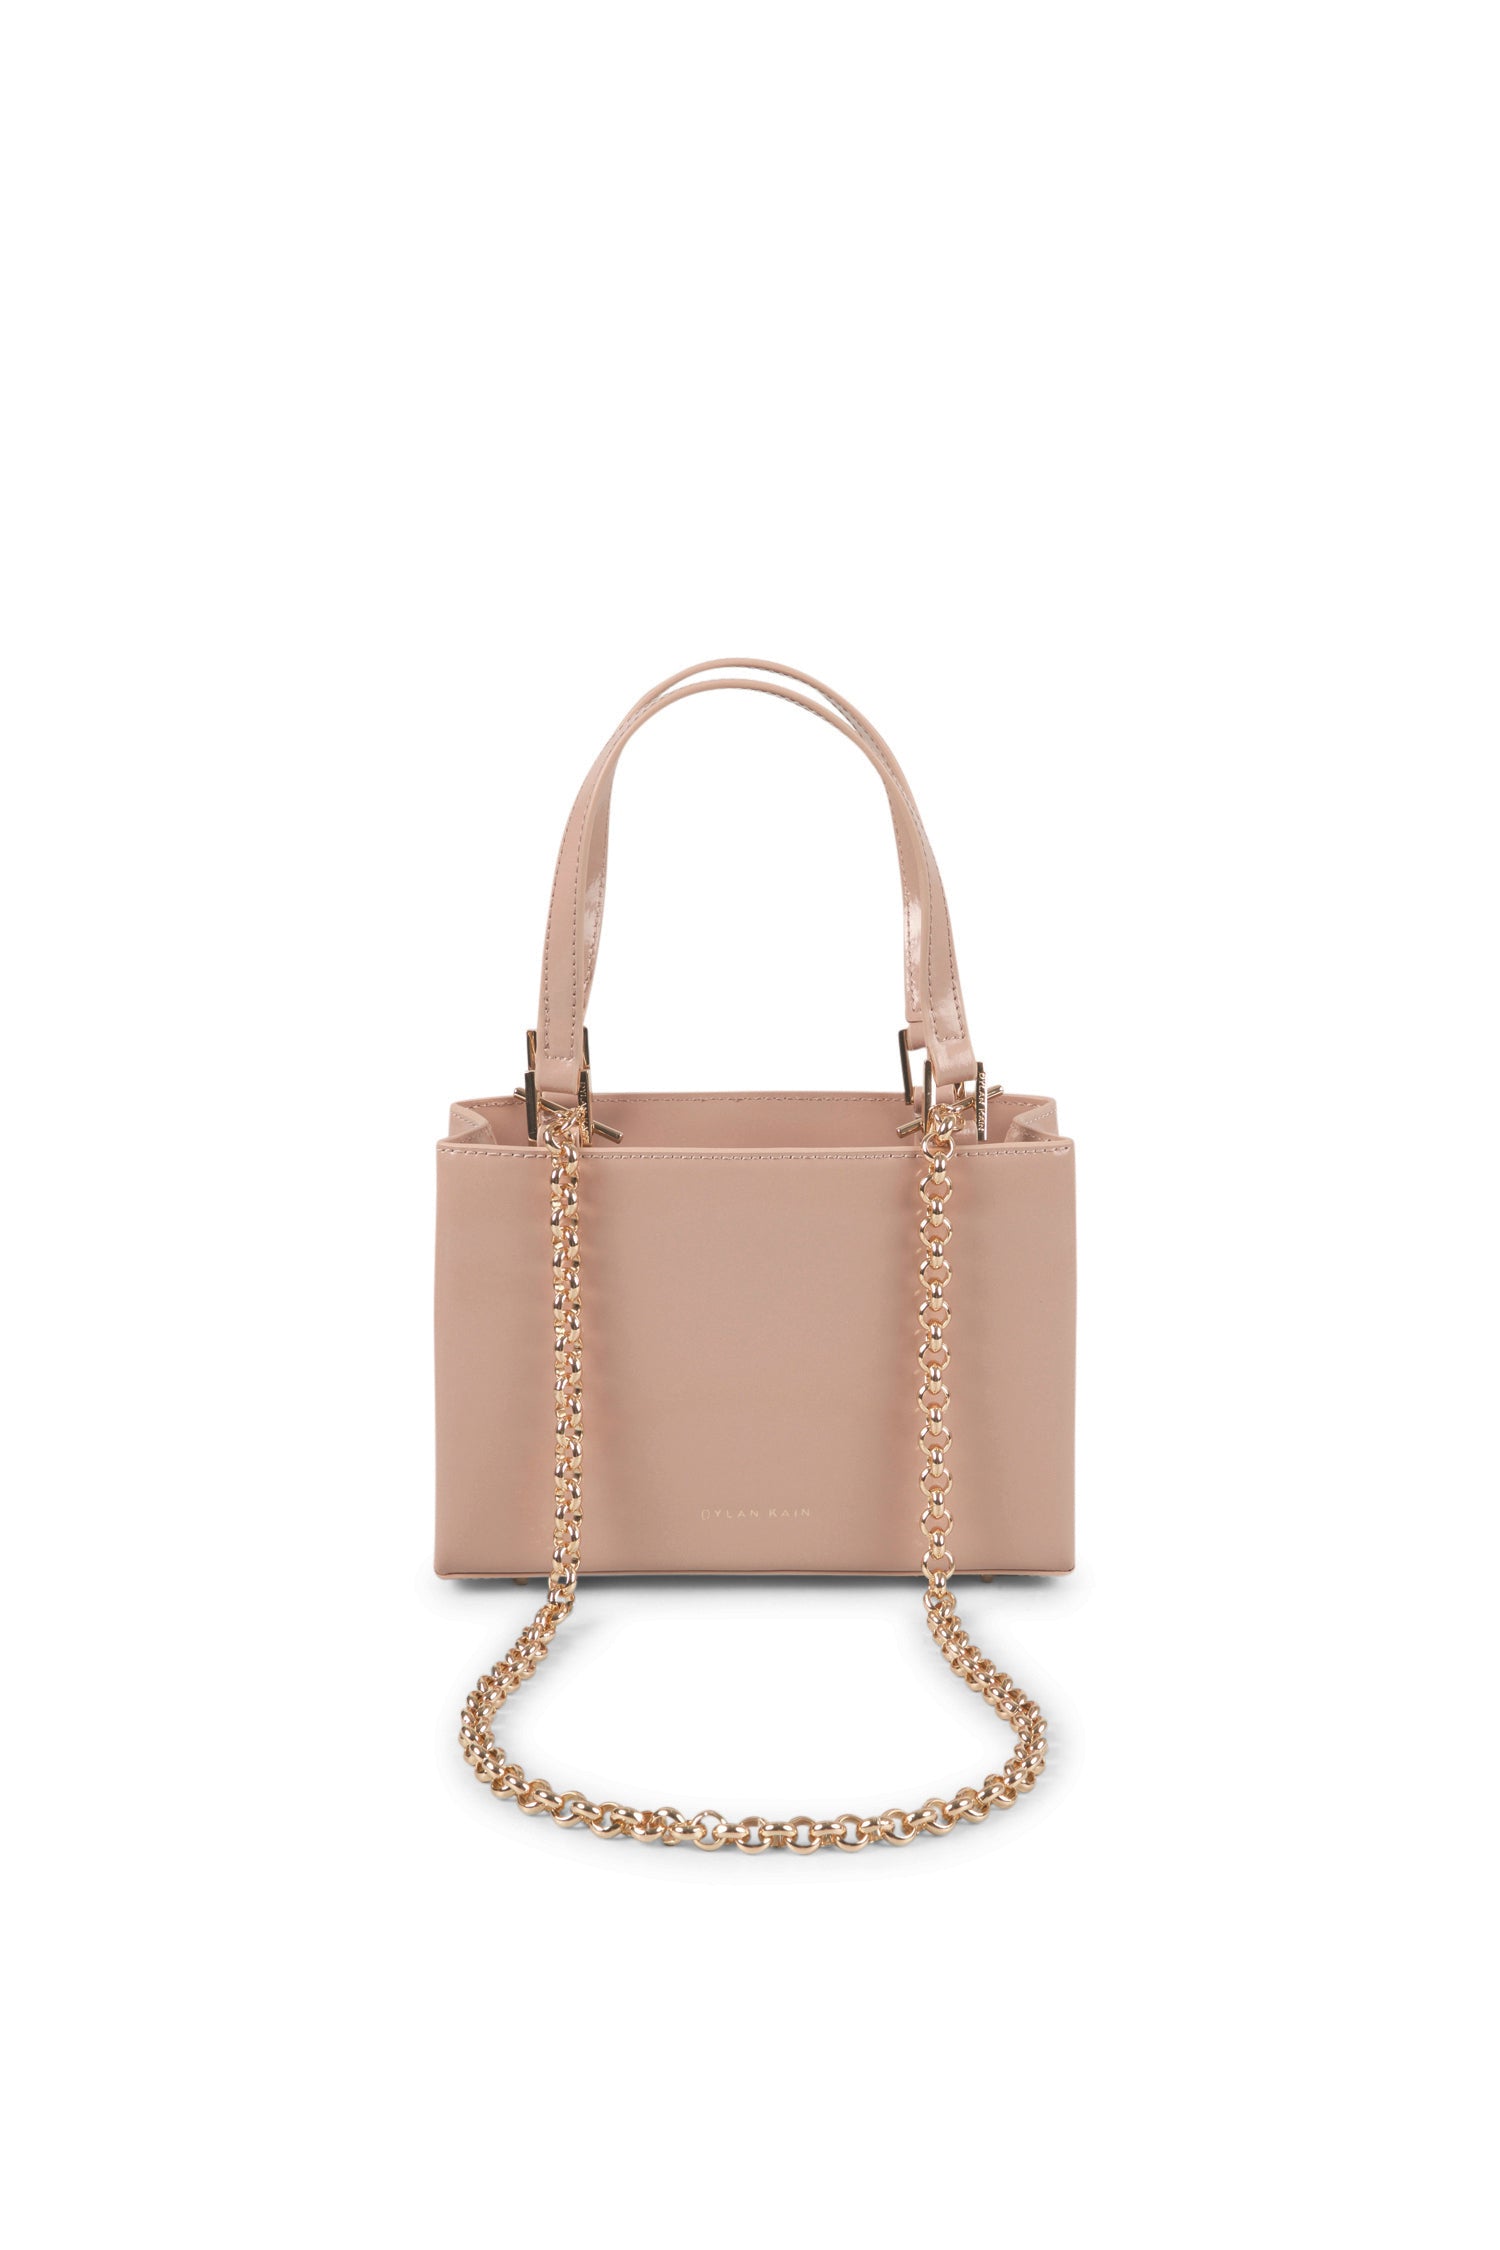 The Paltrow Patent Bag Fawn